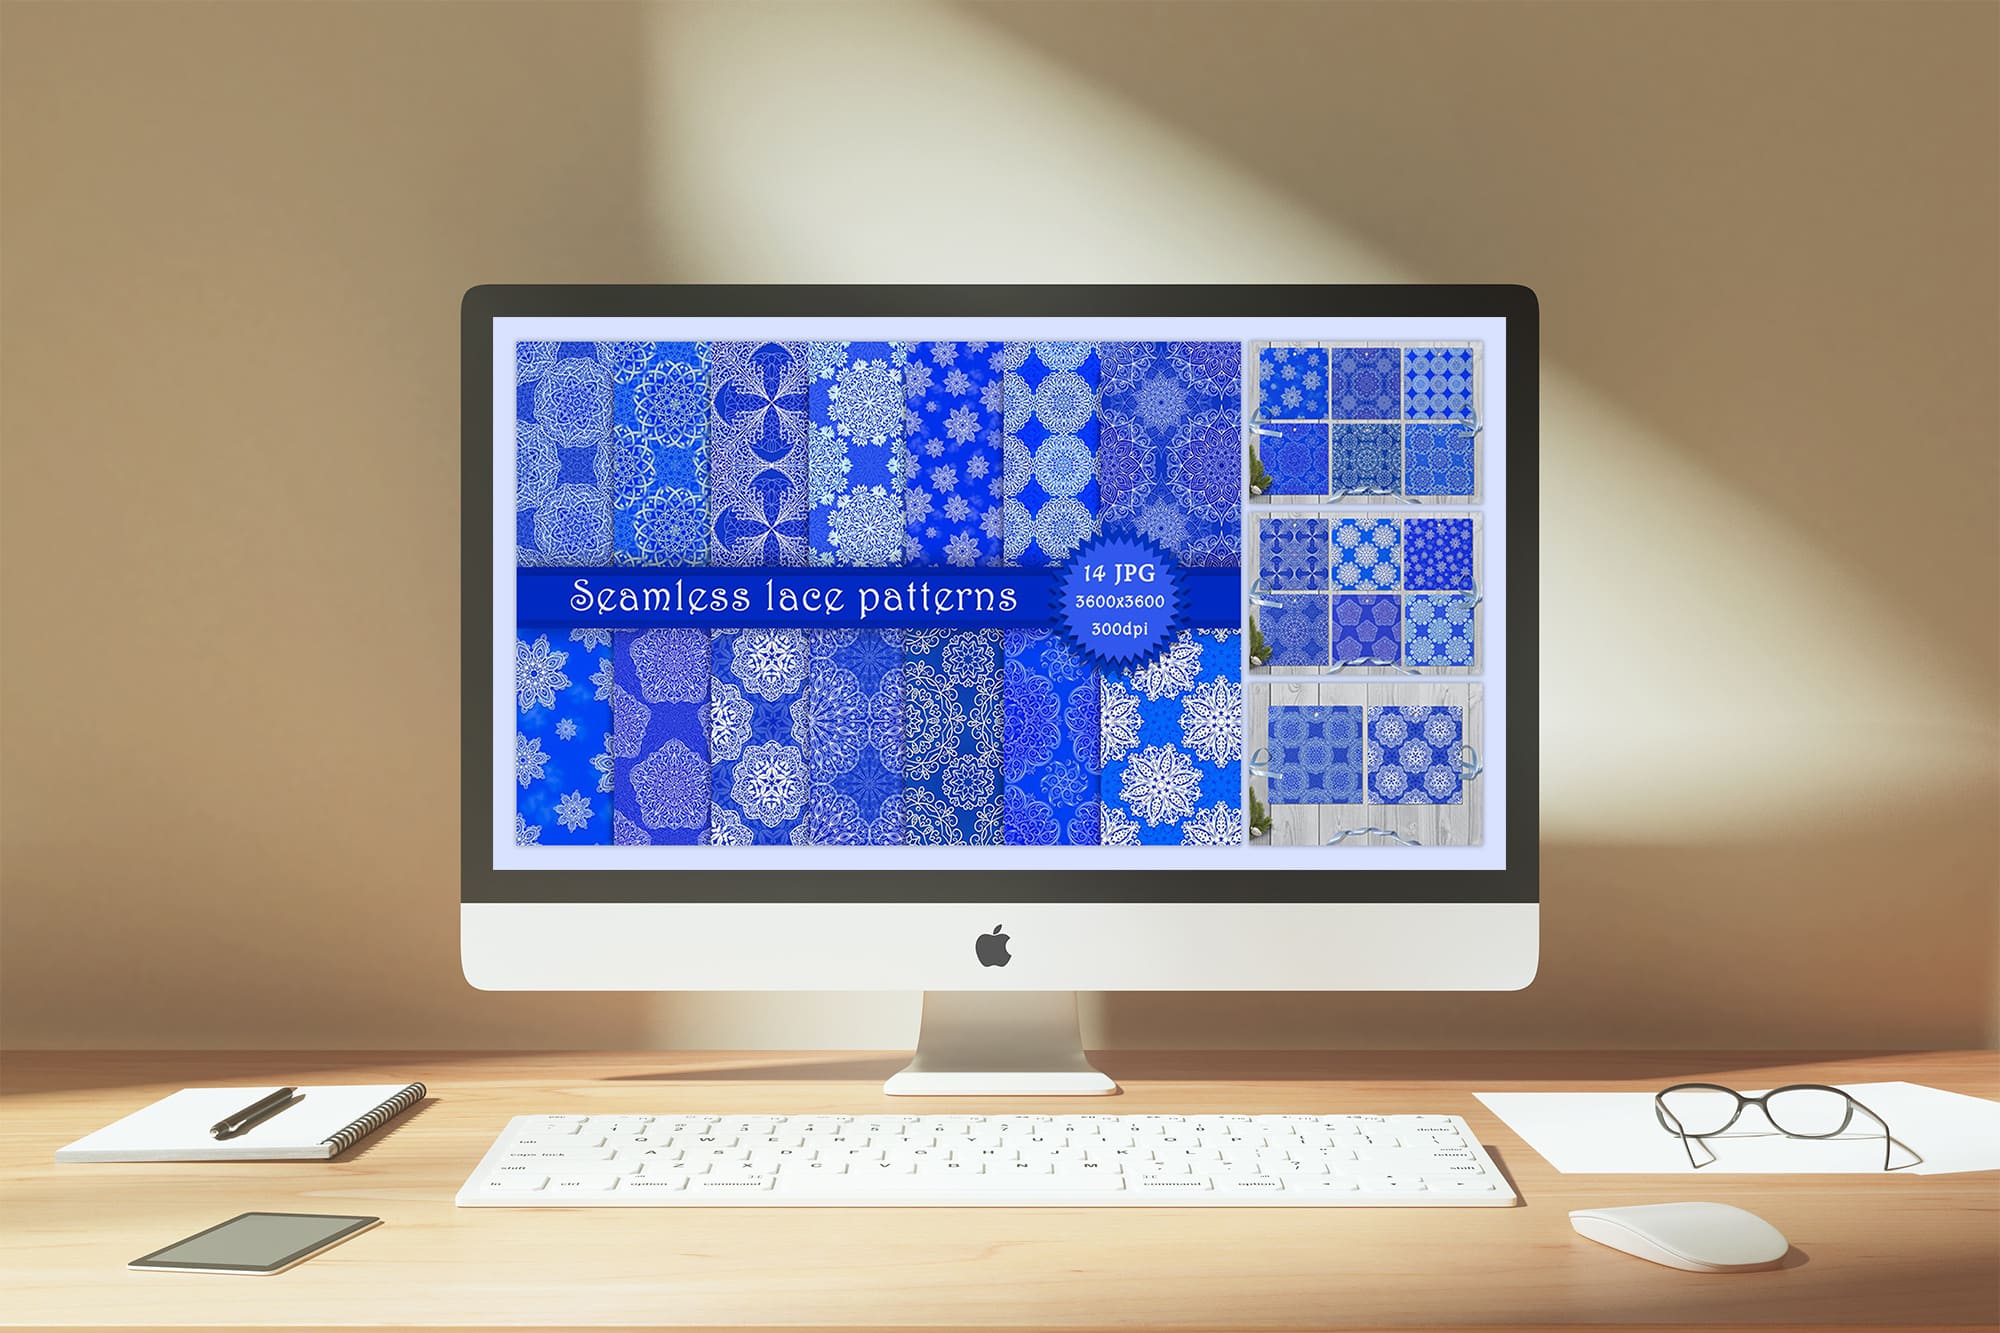 Mockup of a iMac with different seamless lace patterns.